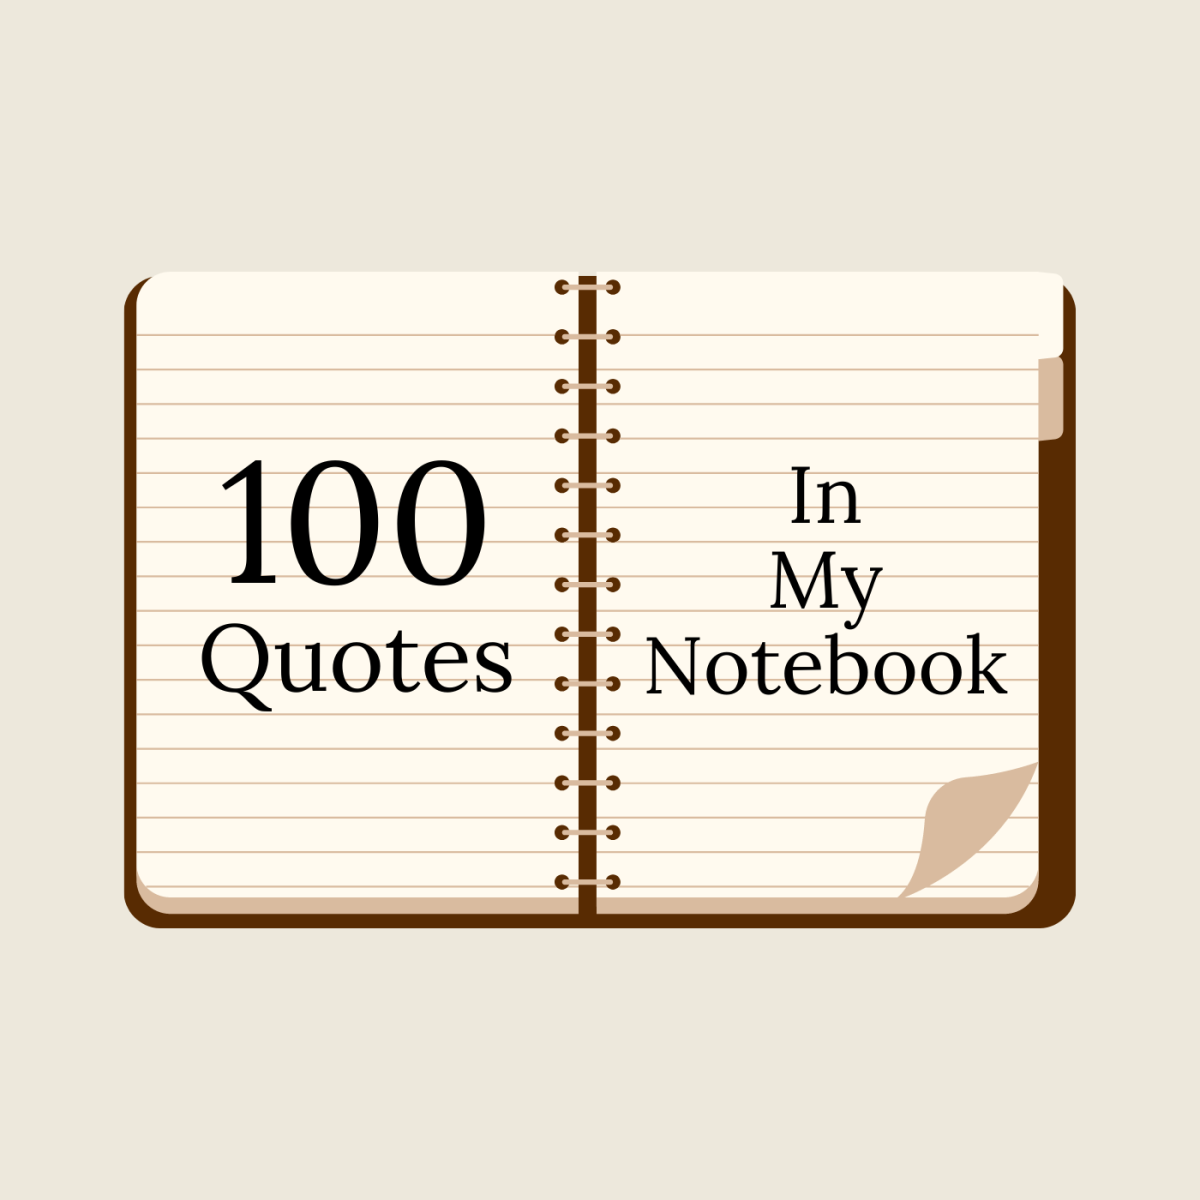 100 Best Quotes in My Notebook: Sayings on Art, Love, and More